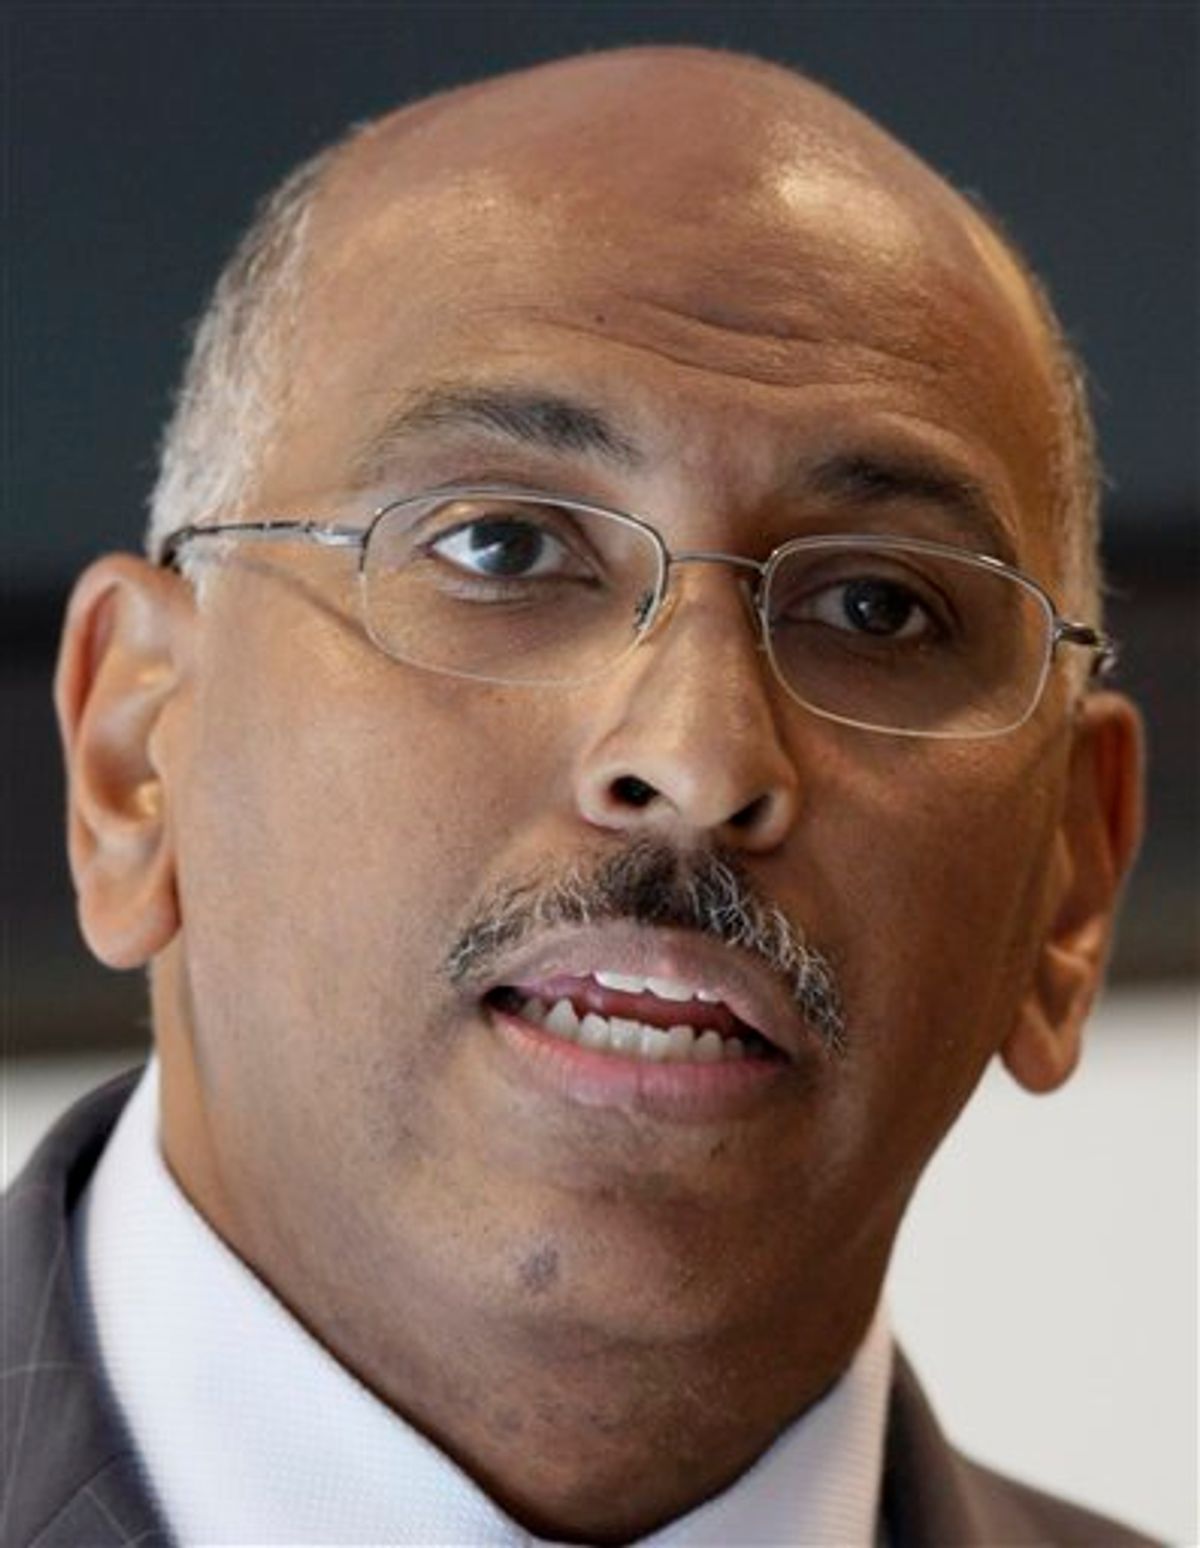 FILE - In this June 24, 2010, file photo Republican National Committee Chairman Michael Steele speaks in San Francisco. On a morning talk show Sunday July 4, 2010, Senate Armed Services Committee's ranking Republican Sen. John McCain, R-Ariz. strongly criticized recent comments Steele made about the war in Afghanistan at a GOP fundraiser, calling them "wildly inaccurate" and inexcusable. Steele called the U.S. commitment of troops in Afghanistan a mistaken "war of Obama's choosing." (AP Photo/Jeff Chiu, File) (AP)